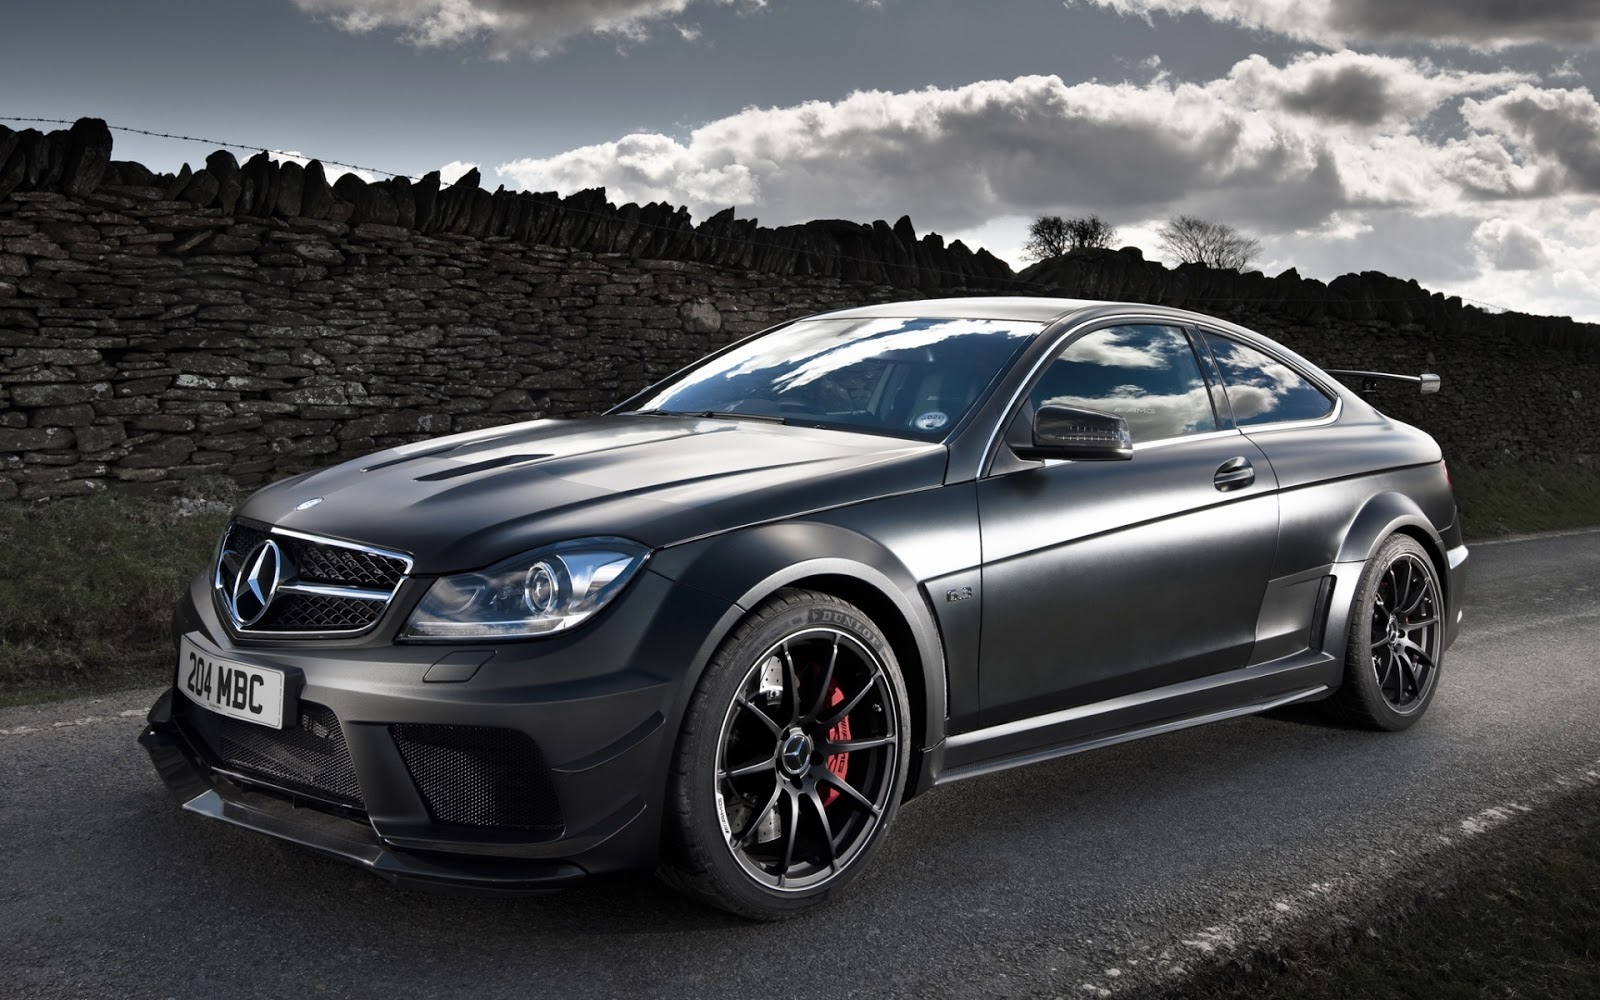 Mercedes Benz C63 HD Wallpaper Check Out The Cool